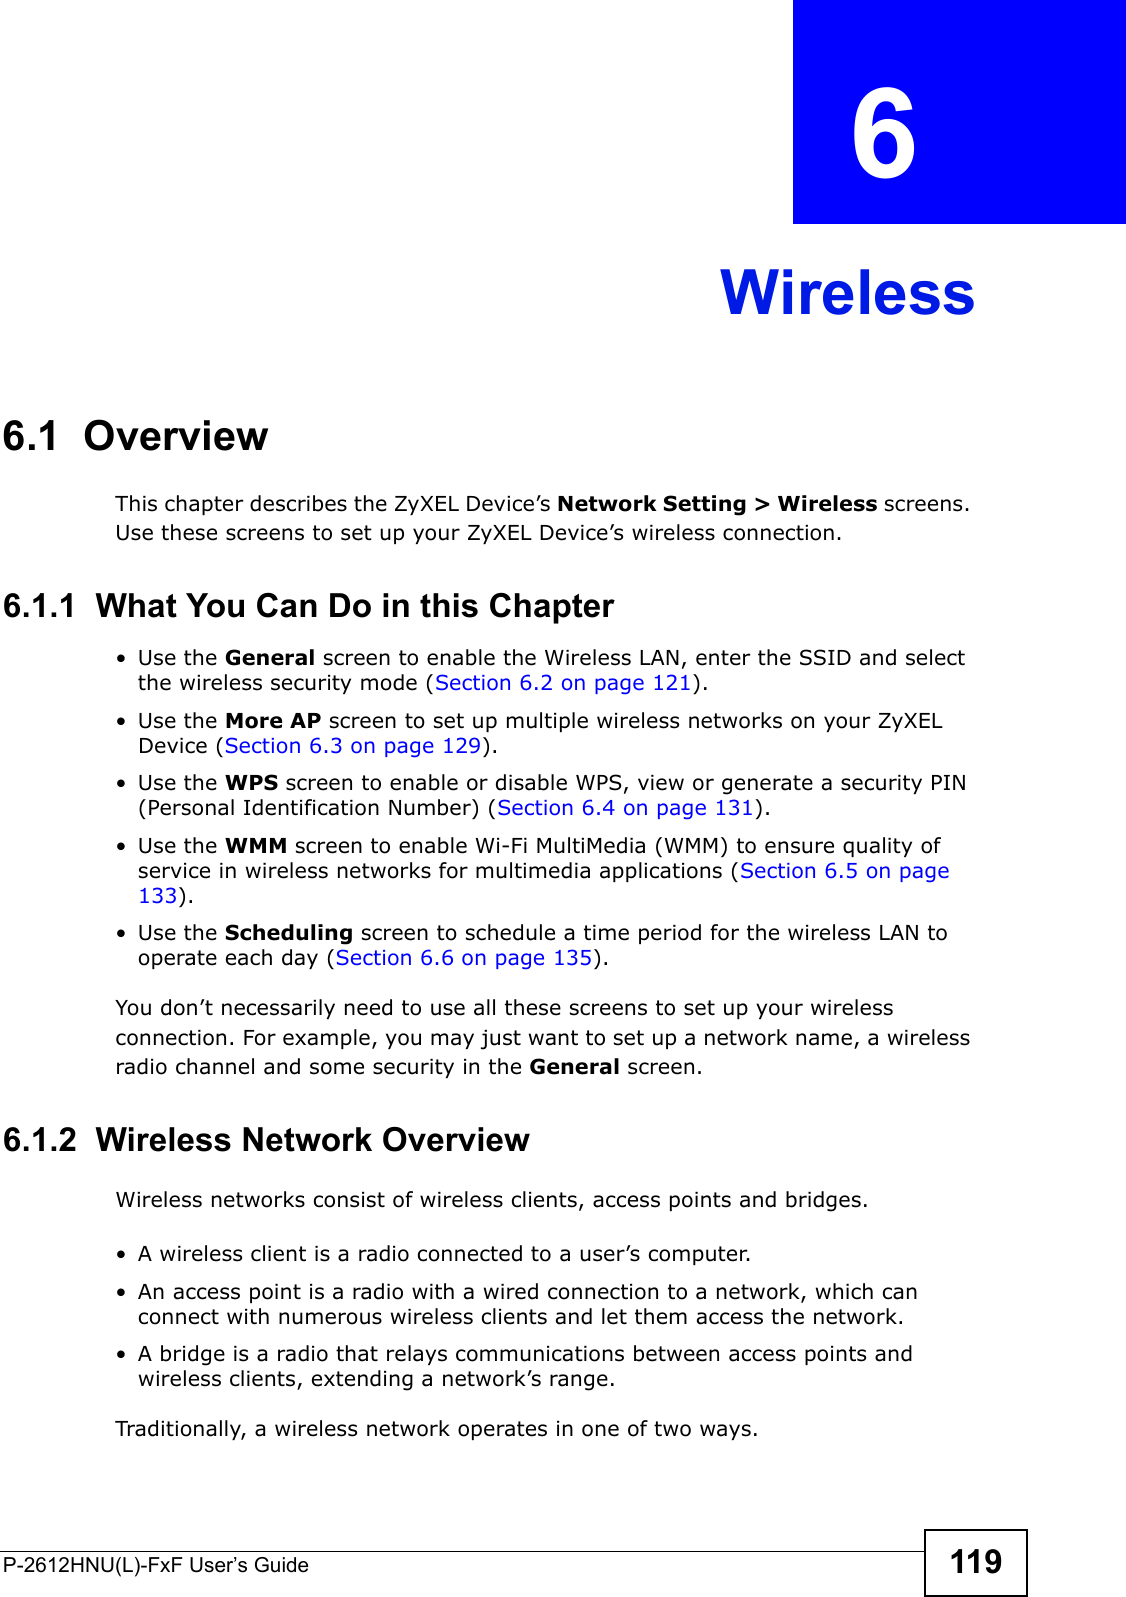 P-2612HNU(L)-FxF User’s Guide 119CHAPTER   6 Wireless6.1  Overview This chapter describes the ZyXEL Device’s Network Setting &gt; Wireless screens.Use these screens to set up your ZyXEL Device’s wireless connection.6.1.1  What You Can Do in this Chapter• Use the General screen to enable the Wireless LAN, enter the SSID and select the wireless security mode (Section 6.2 on page 121).• Use the More AP screen to set up multiple wireless networks on your ZyXEL Device (Section 6.3 on page 129).• Use the WPS screen to enable or disable WPS, view or generate a security PIN (Personal Identification Number) (Section 6.4 on page 131).• Use the WMM screen to enable Wi-Fi MultiMedia (WMM) to ensure quality of service in wireless networks for multimedia applications (Section 6.5 on page 133).• Use the Scheduling screen to schedule a time period for the wireless LAN tooperate each day (Section 6.6 on page 135).You don’t necessarily need to use all these screens to set up your wireless connection. For example, you may just want to set up a network name, a wireless radio channel and some security in the General screen.6.1.2  Wireless Network OverviewWireless networks consist of wireless clients, access points and bridges.• A wireless client is a radio connected to a user’s computer. • An access point is a radio with a wired connection to a network, which can connect with numerous wireless clients and let them access the network. • A bridge is a radio that relays communications between access points and wireless clients, extending a network’s range. Traditionally, a wireless network operates in one of two ways.